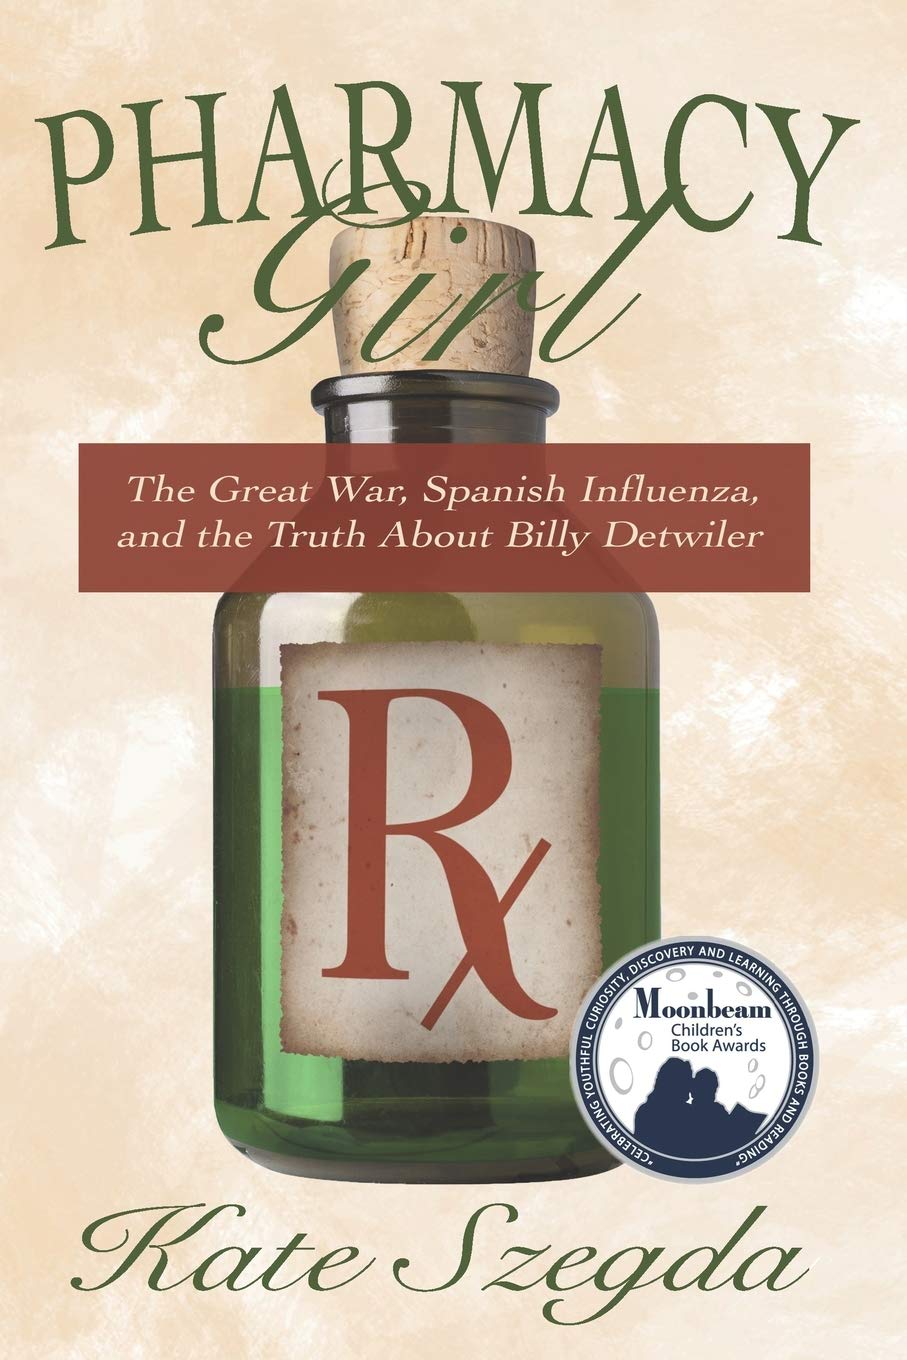 harmacy Girl: The Great War, Spanish Influenza, and the Truth about Billy Detwiler